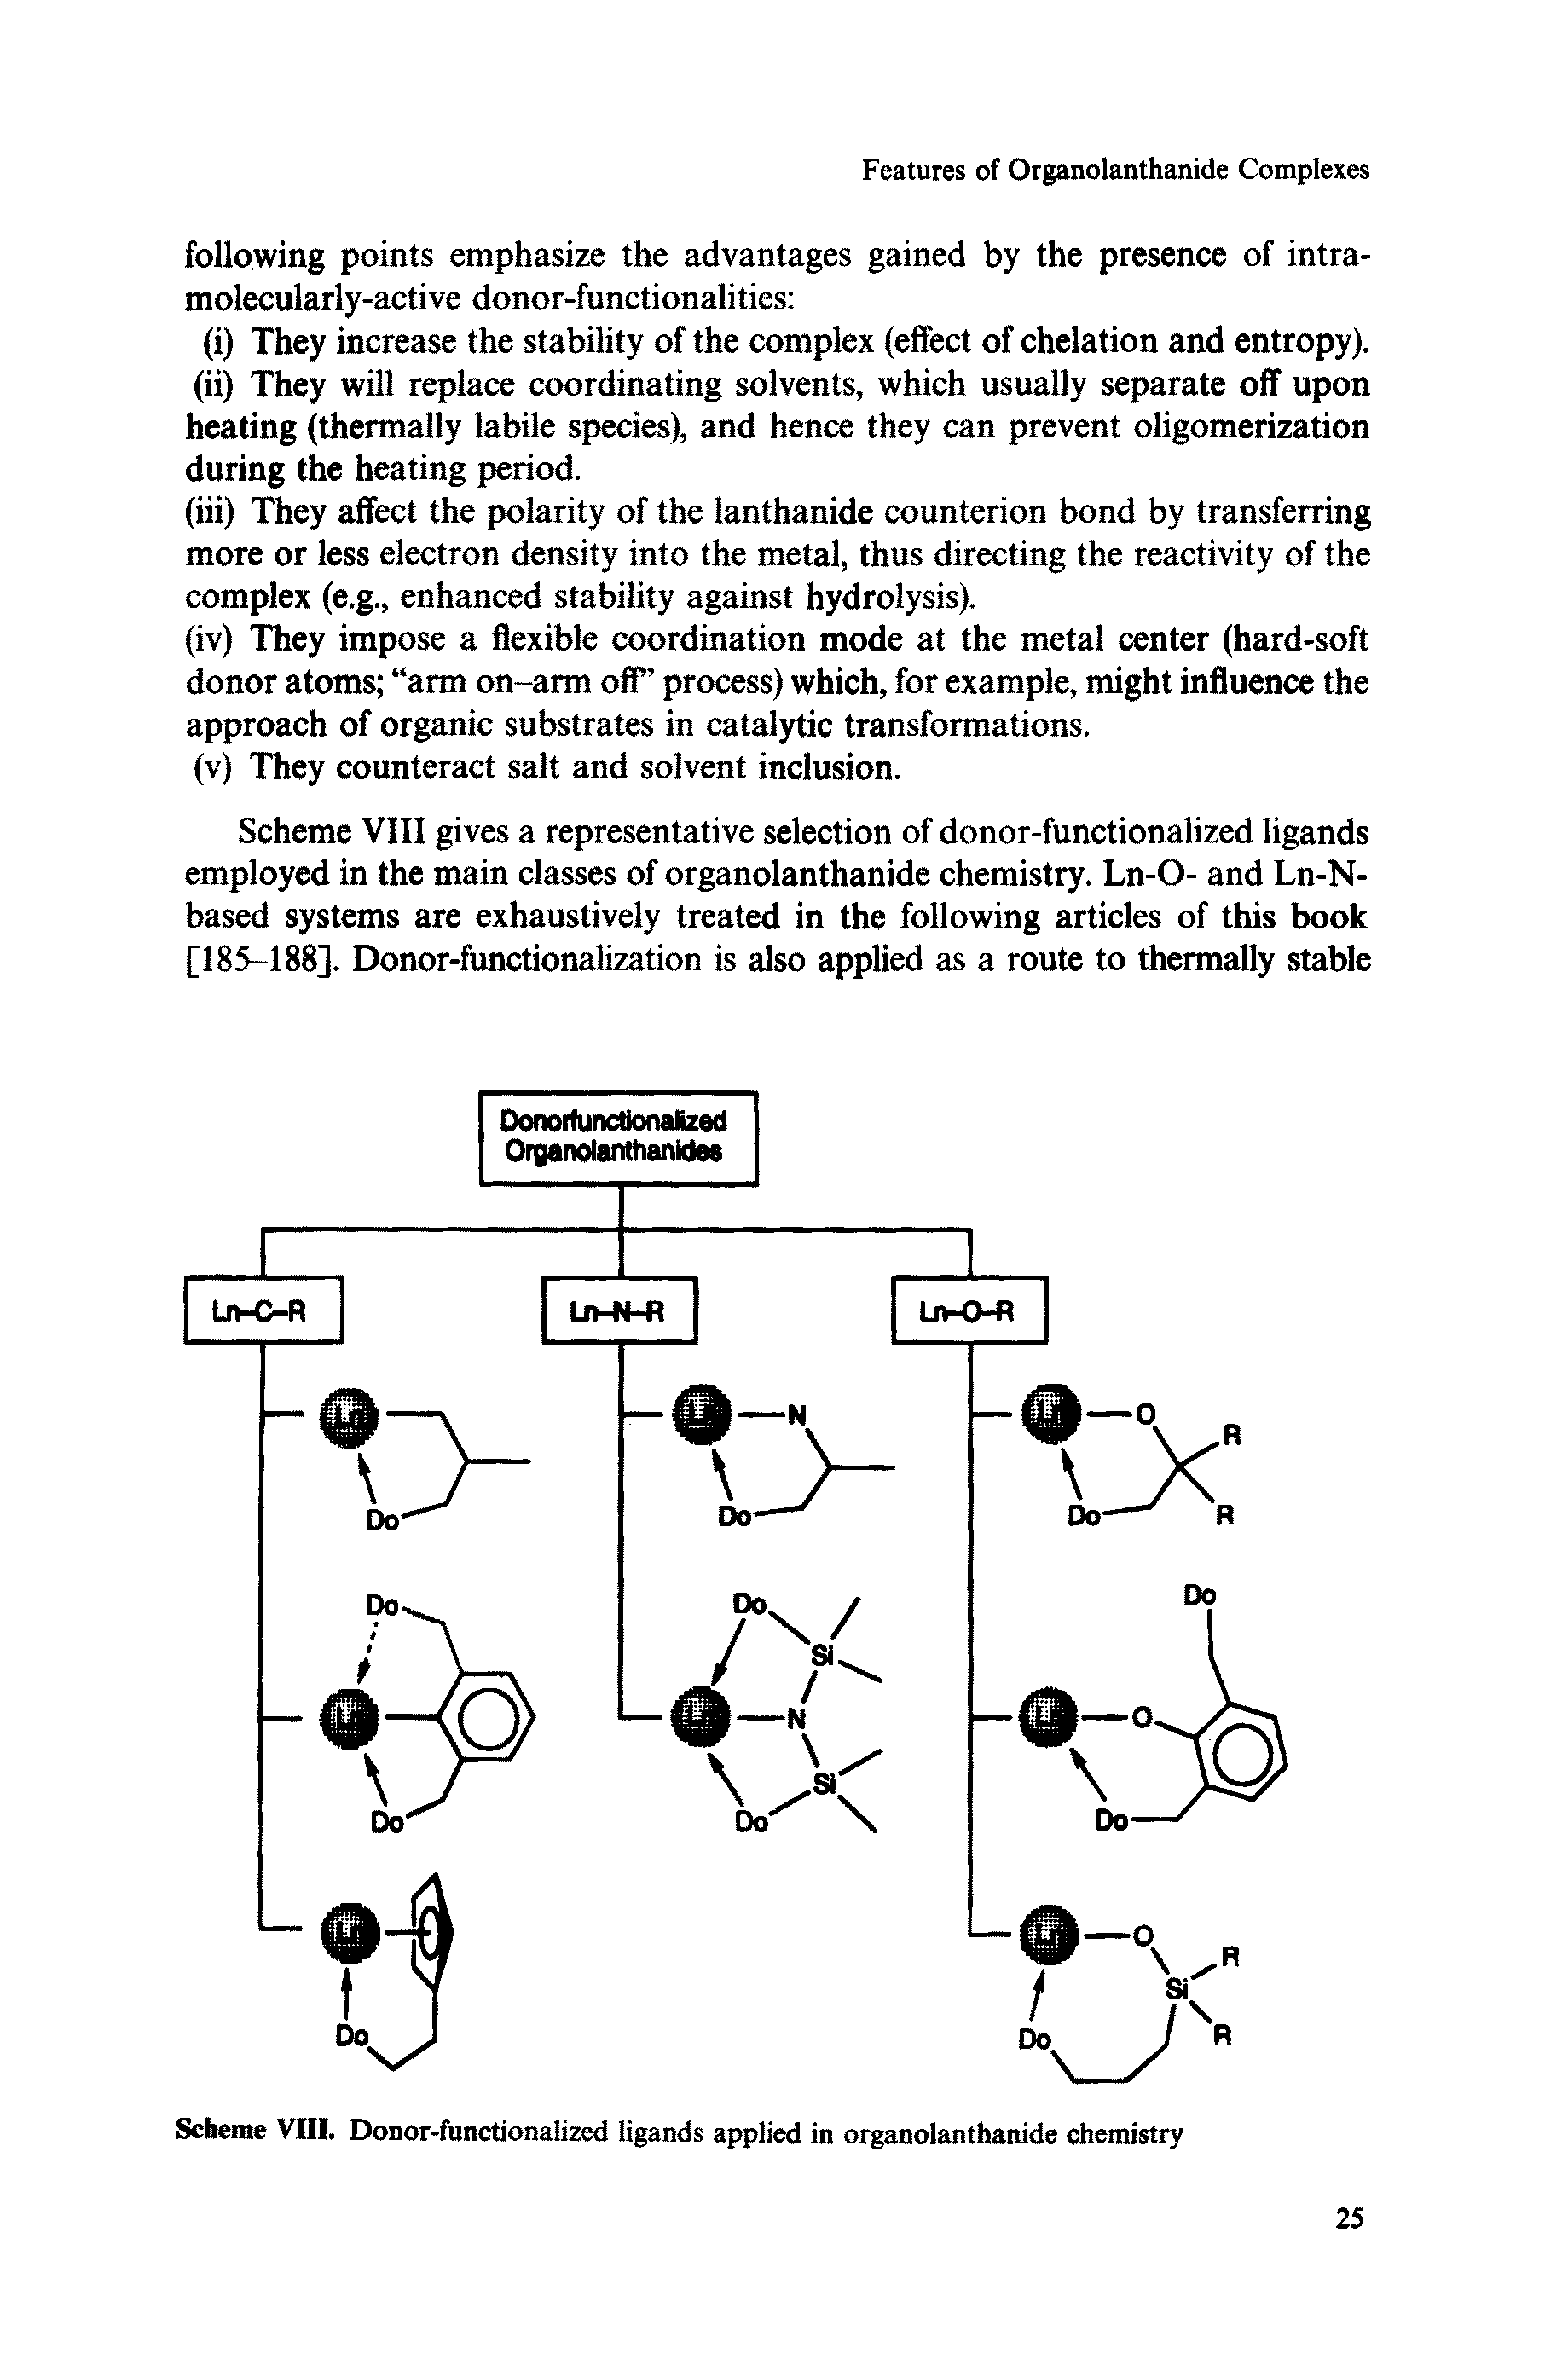 Scheme VIII. Donor-functionalized ligands applied in organolanthanide chemistry...